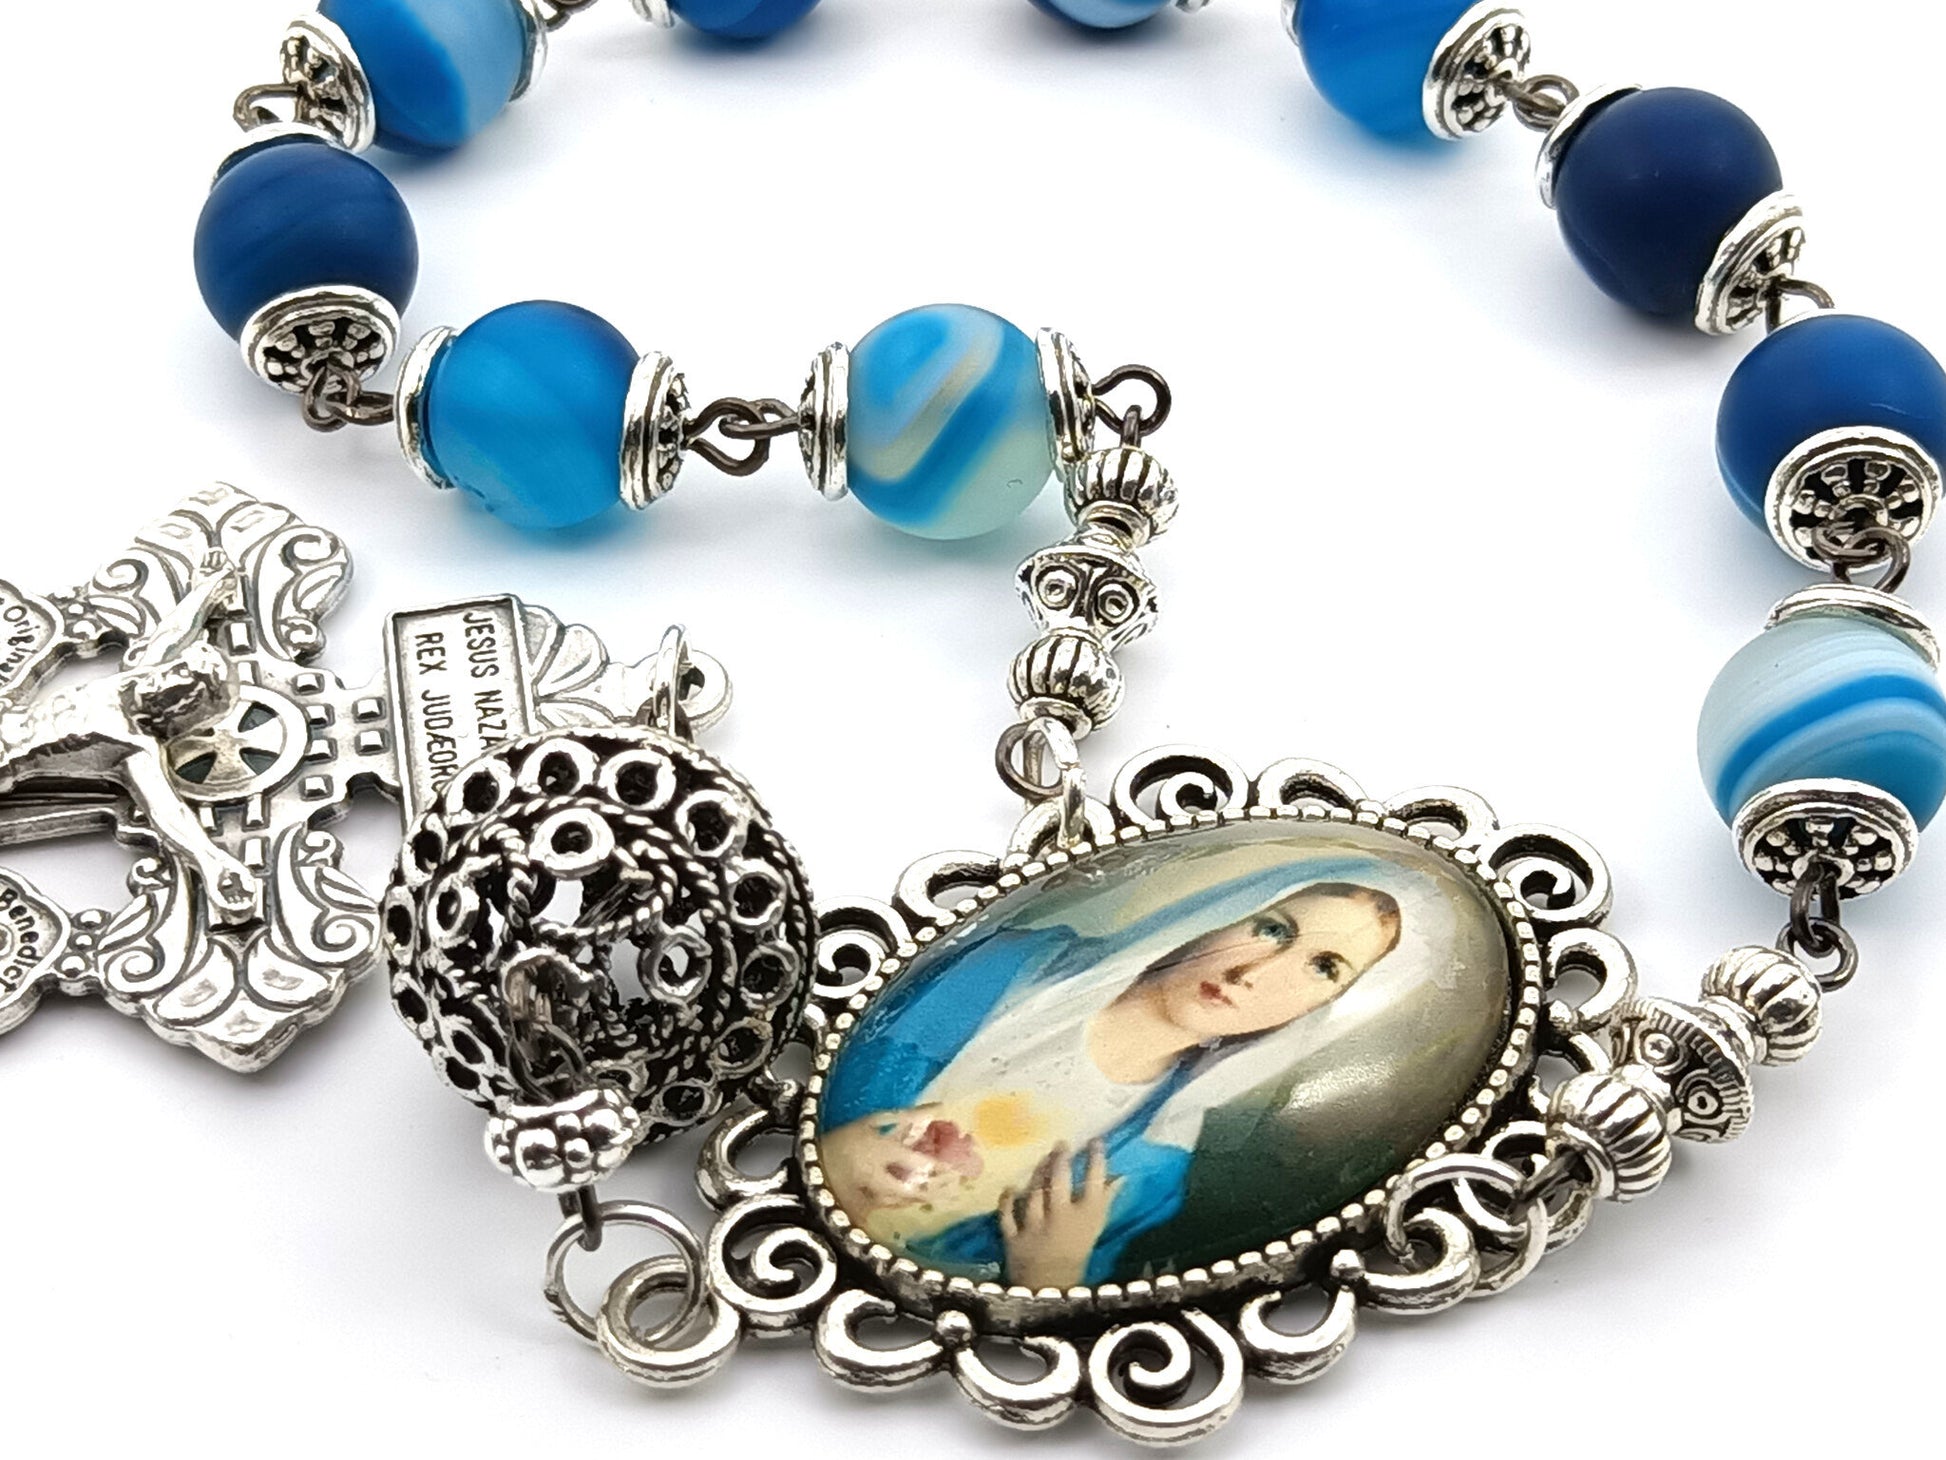 Immaculate Heart of Mary unique rosary beads single decade rosary with blue agate gemstone beads, silver Pardon crucifix, pater bead, bead caps and picture centre medal.